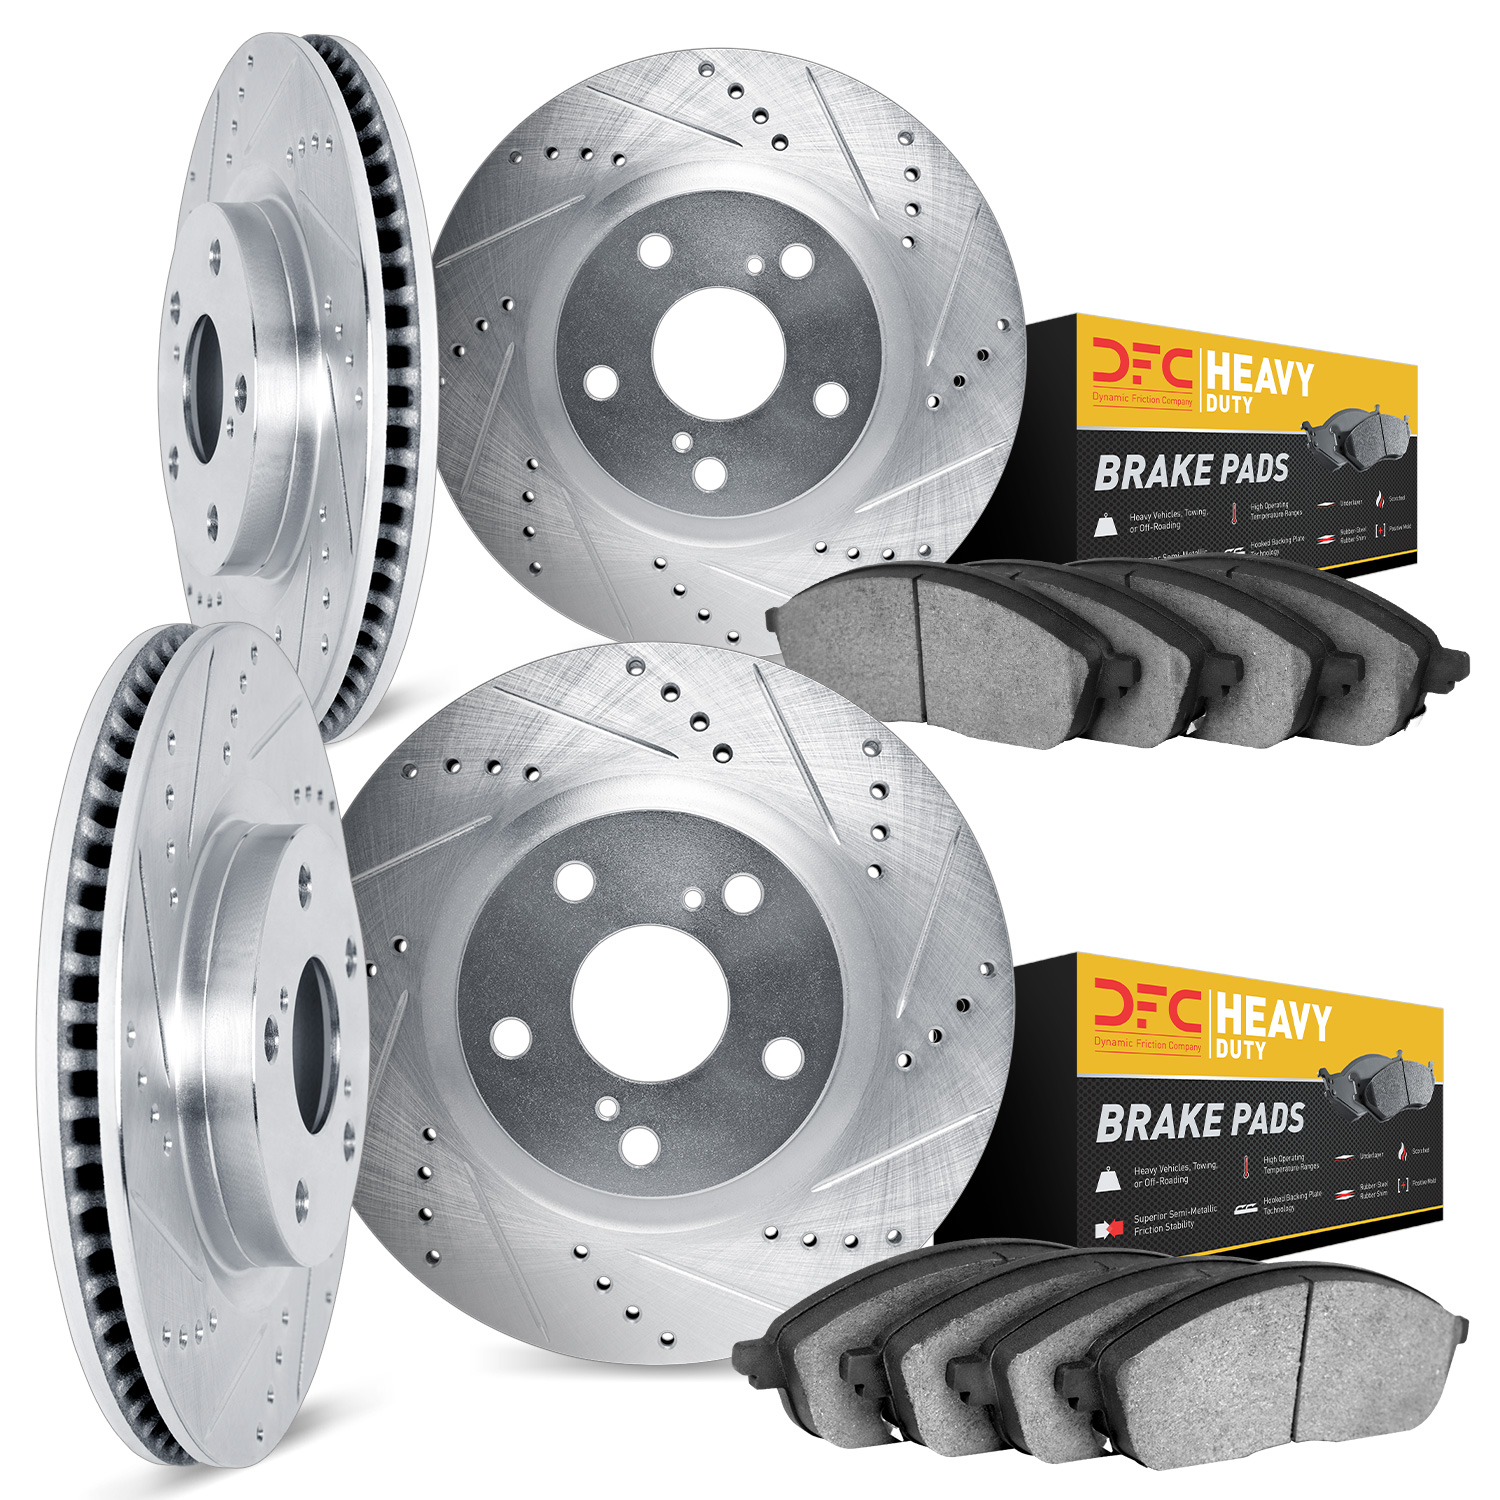 7204-40221 Drilled/Slotted Rotors w/Heavy-Duty Brake Pads Kit [Silver], 2006-2018 Mopar, Position: Front and Rear